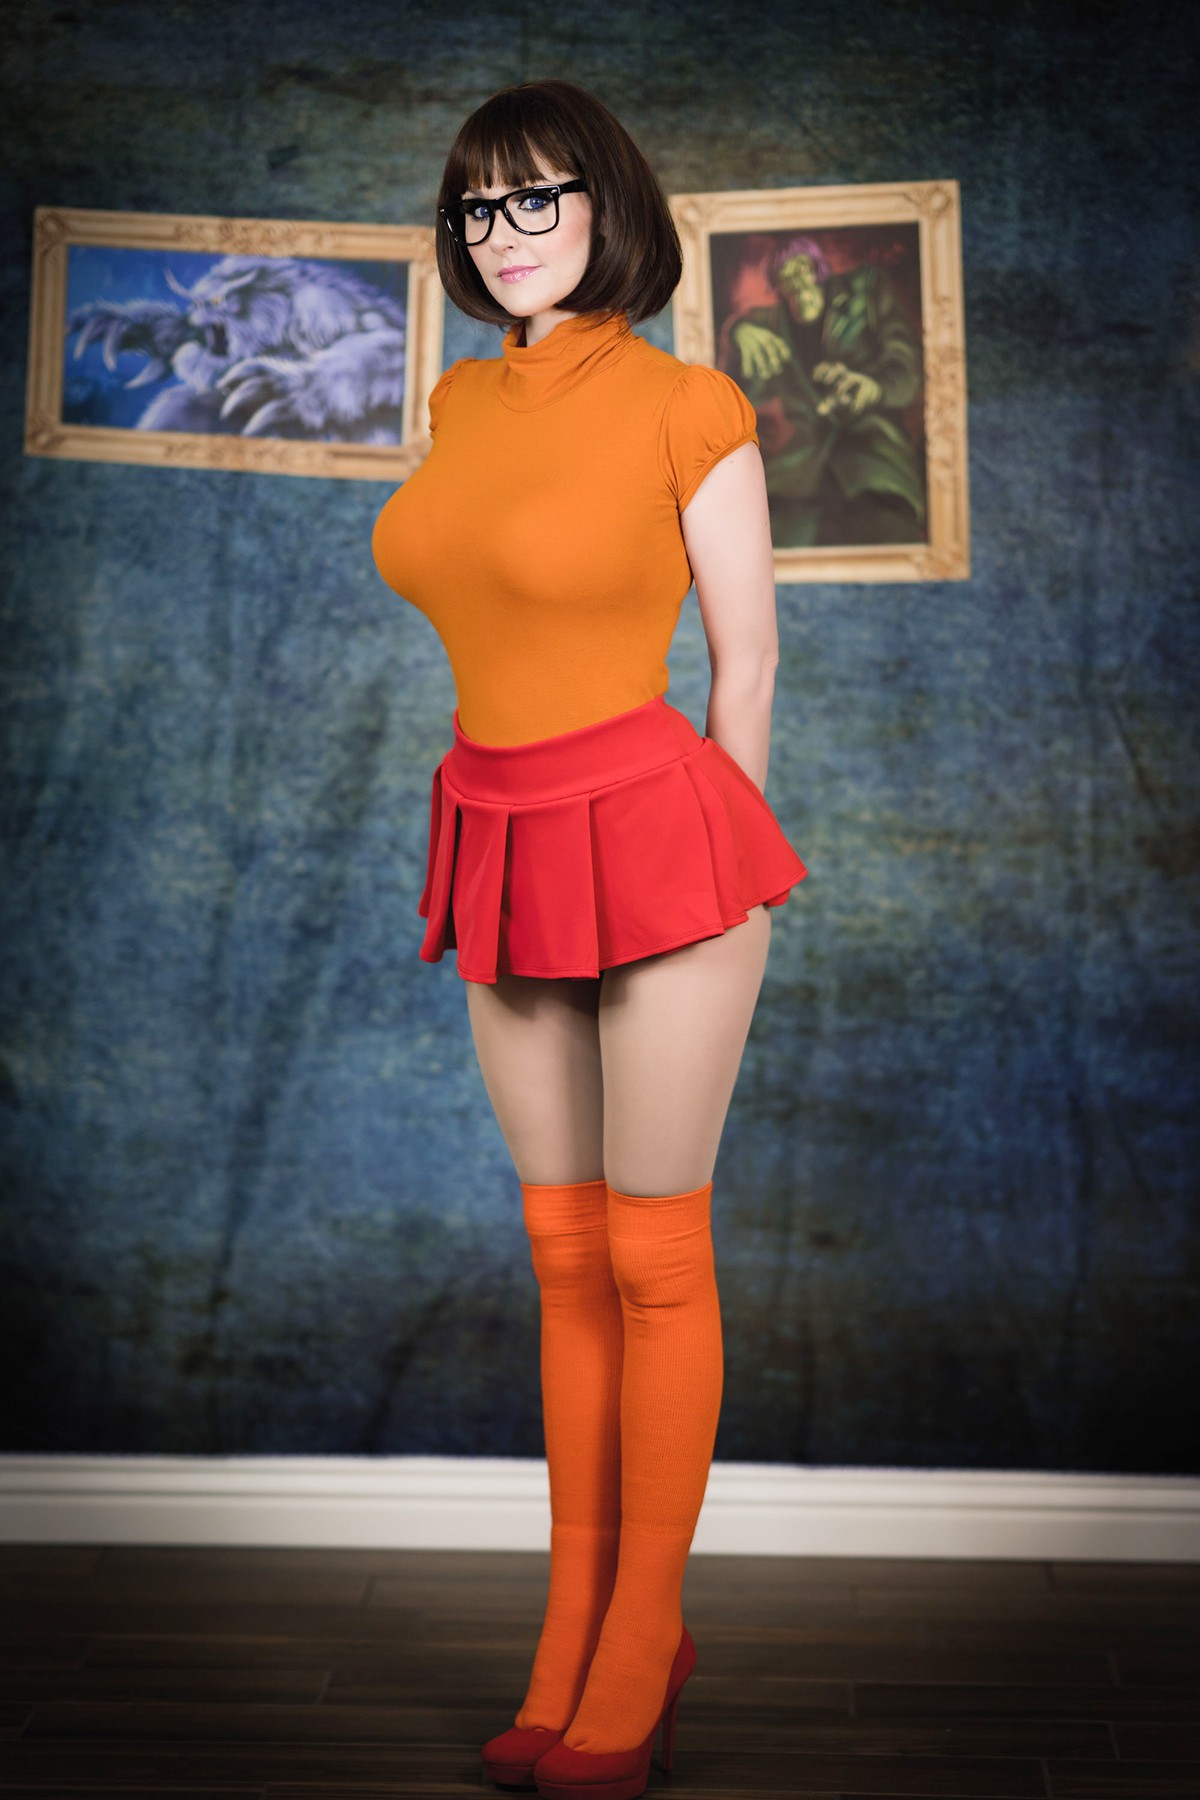 Angie Griffin – Velma Dinkley